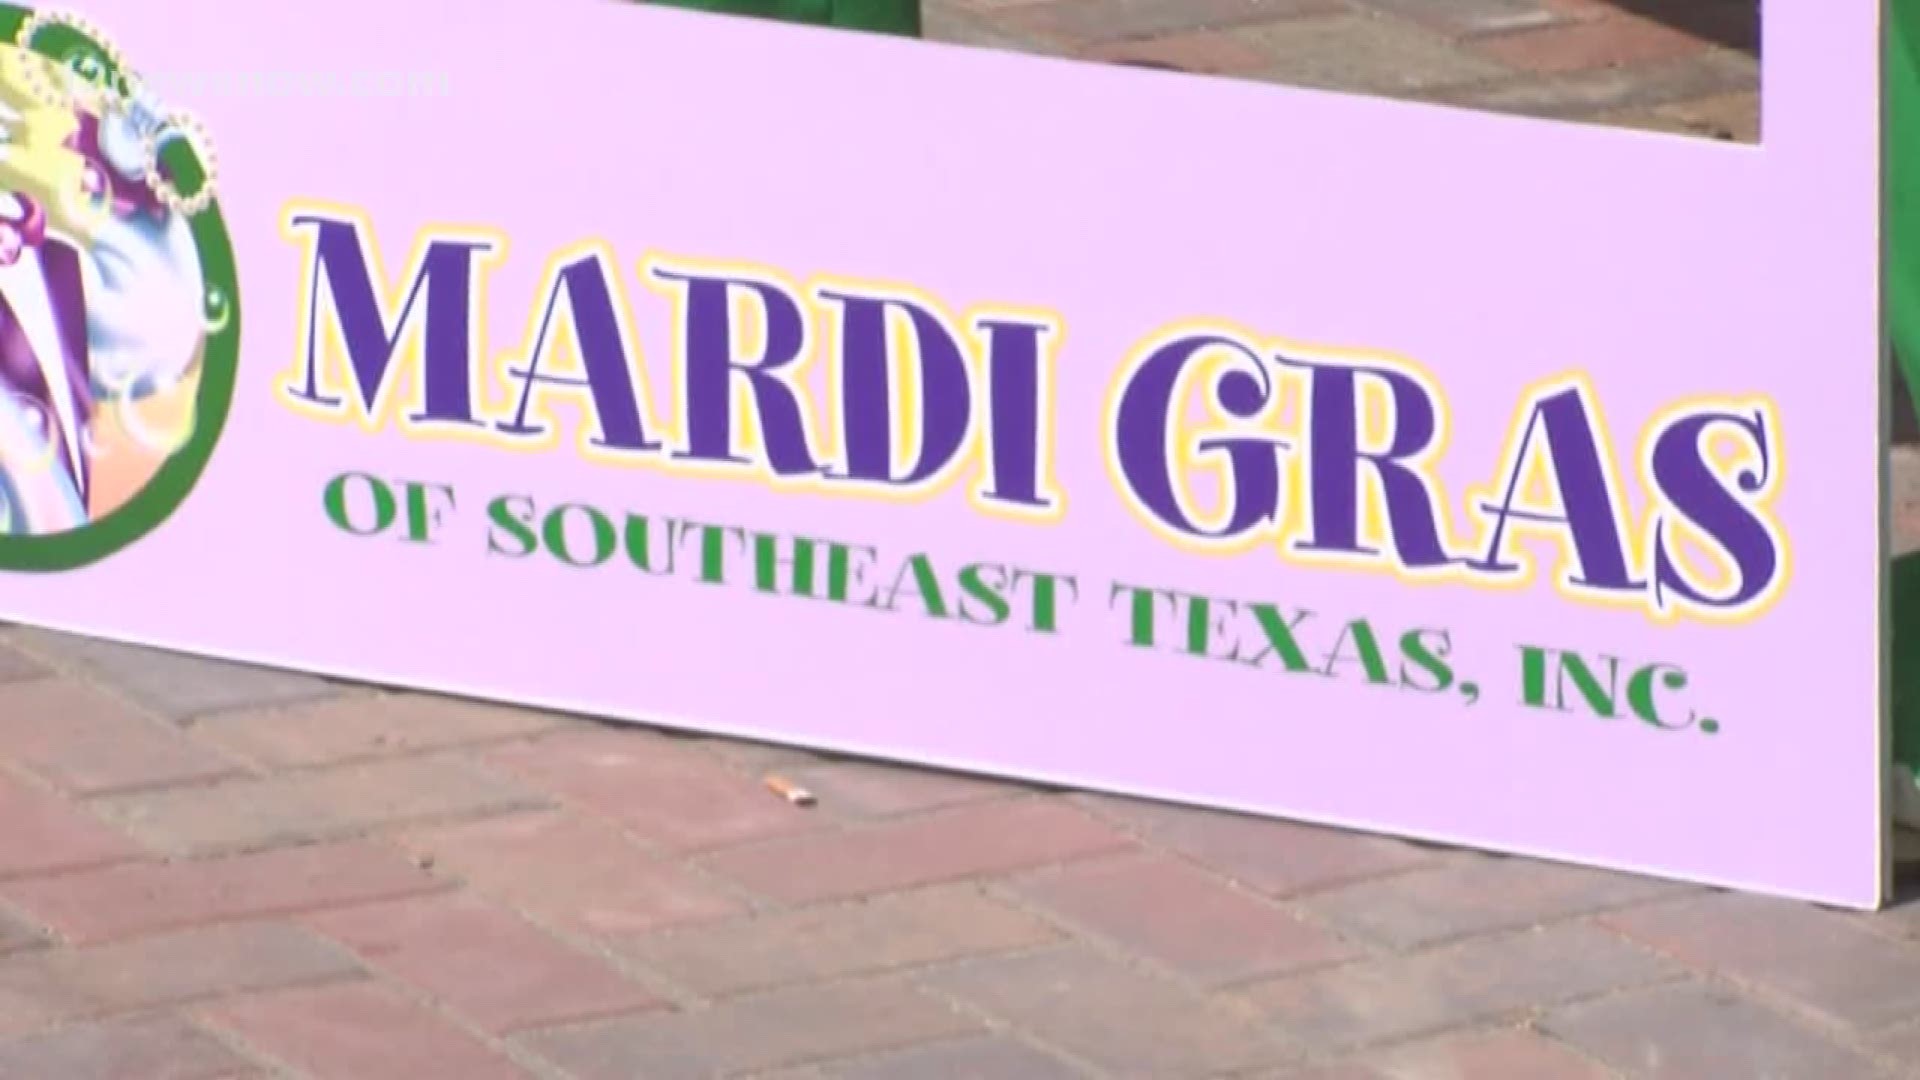 Some Port Neches residents spoke out against the potential move for the event to their city.